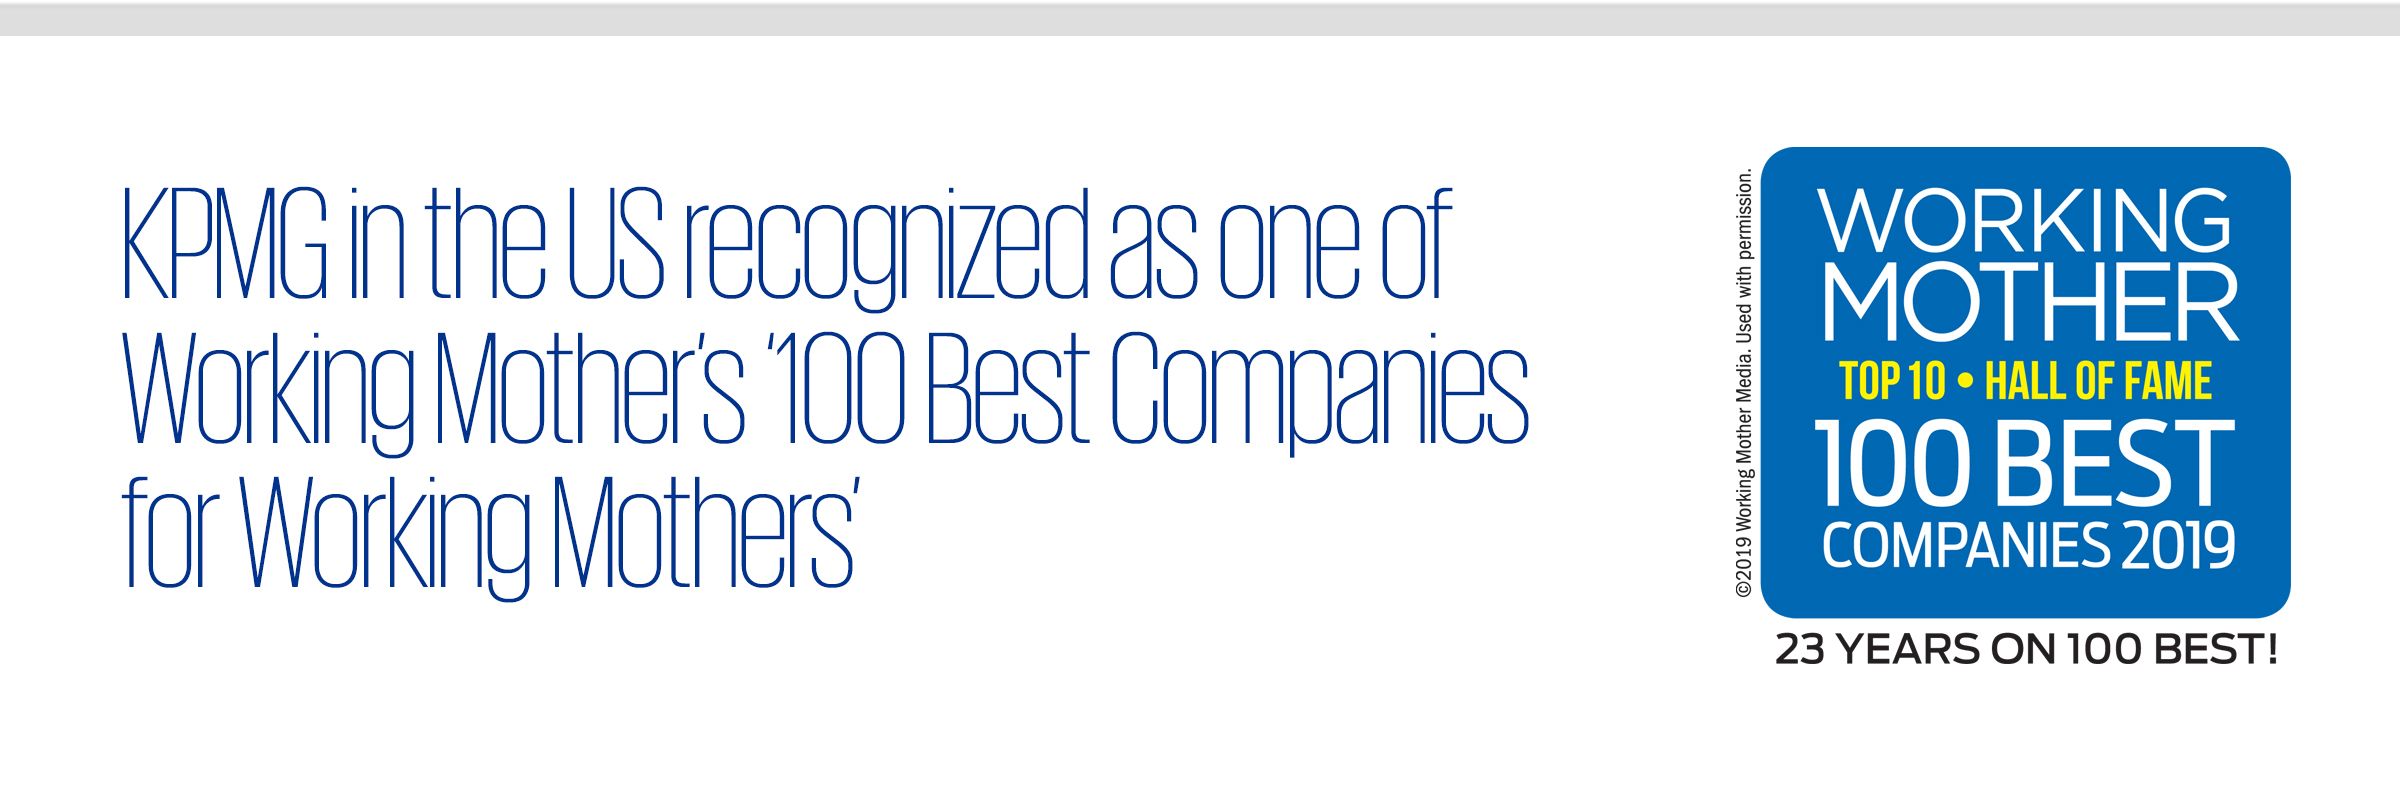 KPMG in the US recognized as one of Working Mother’s 100 Best Companies for Working Mothers 